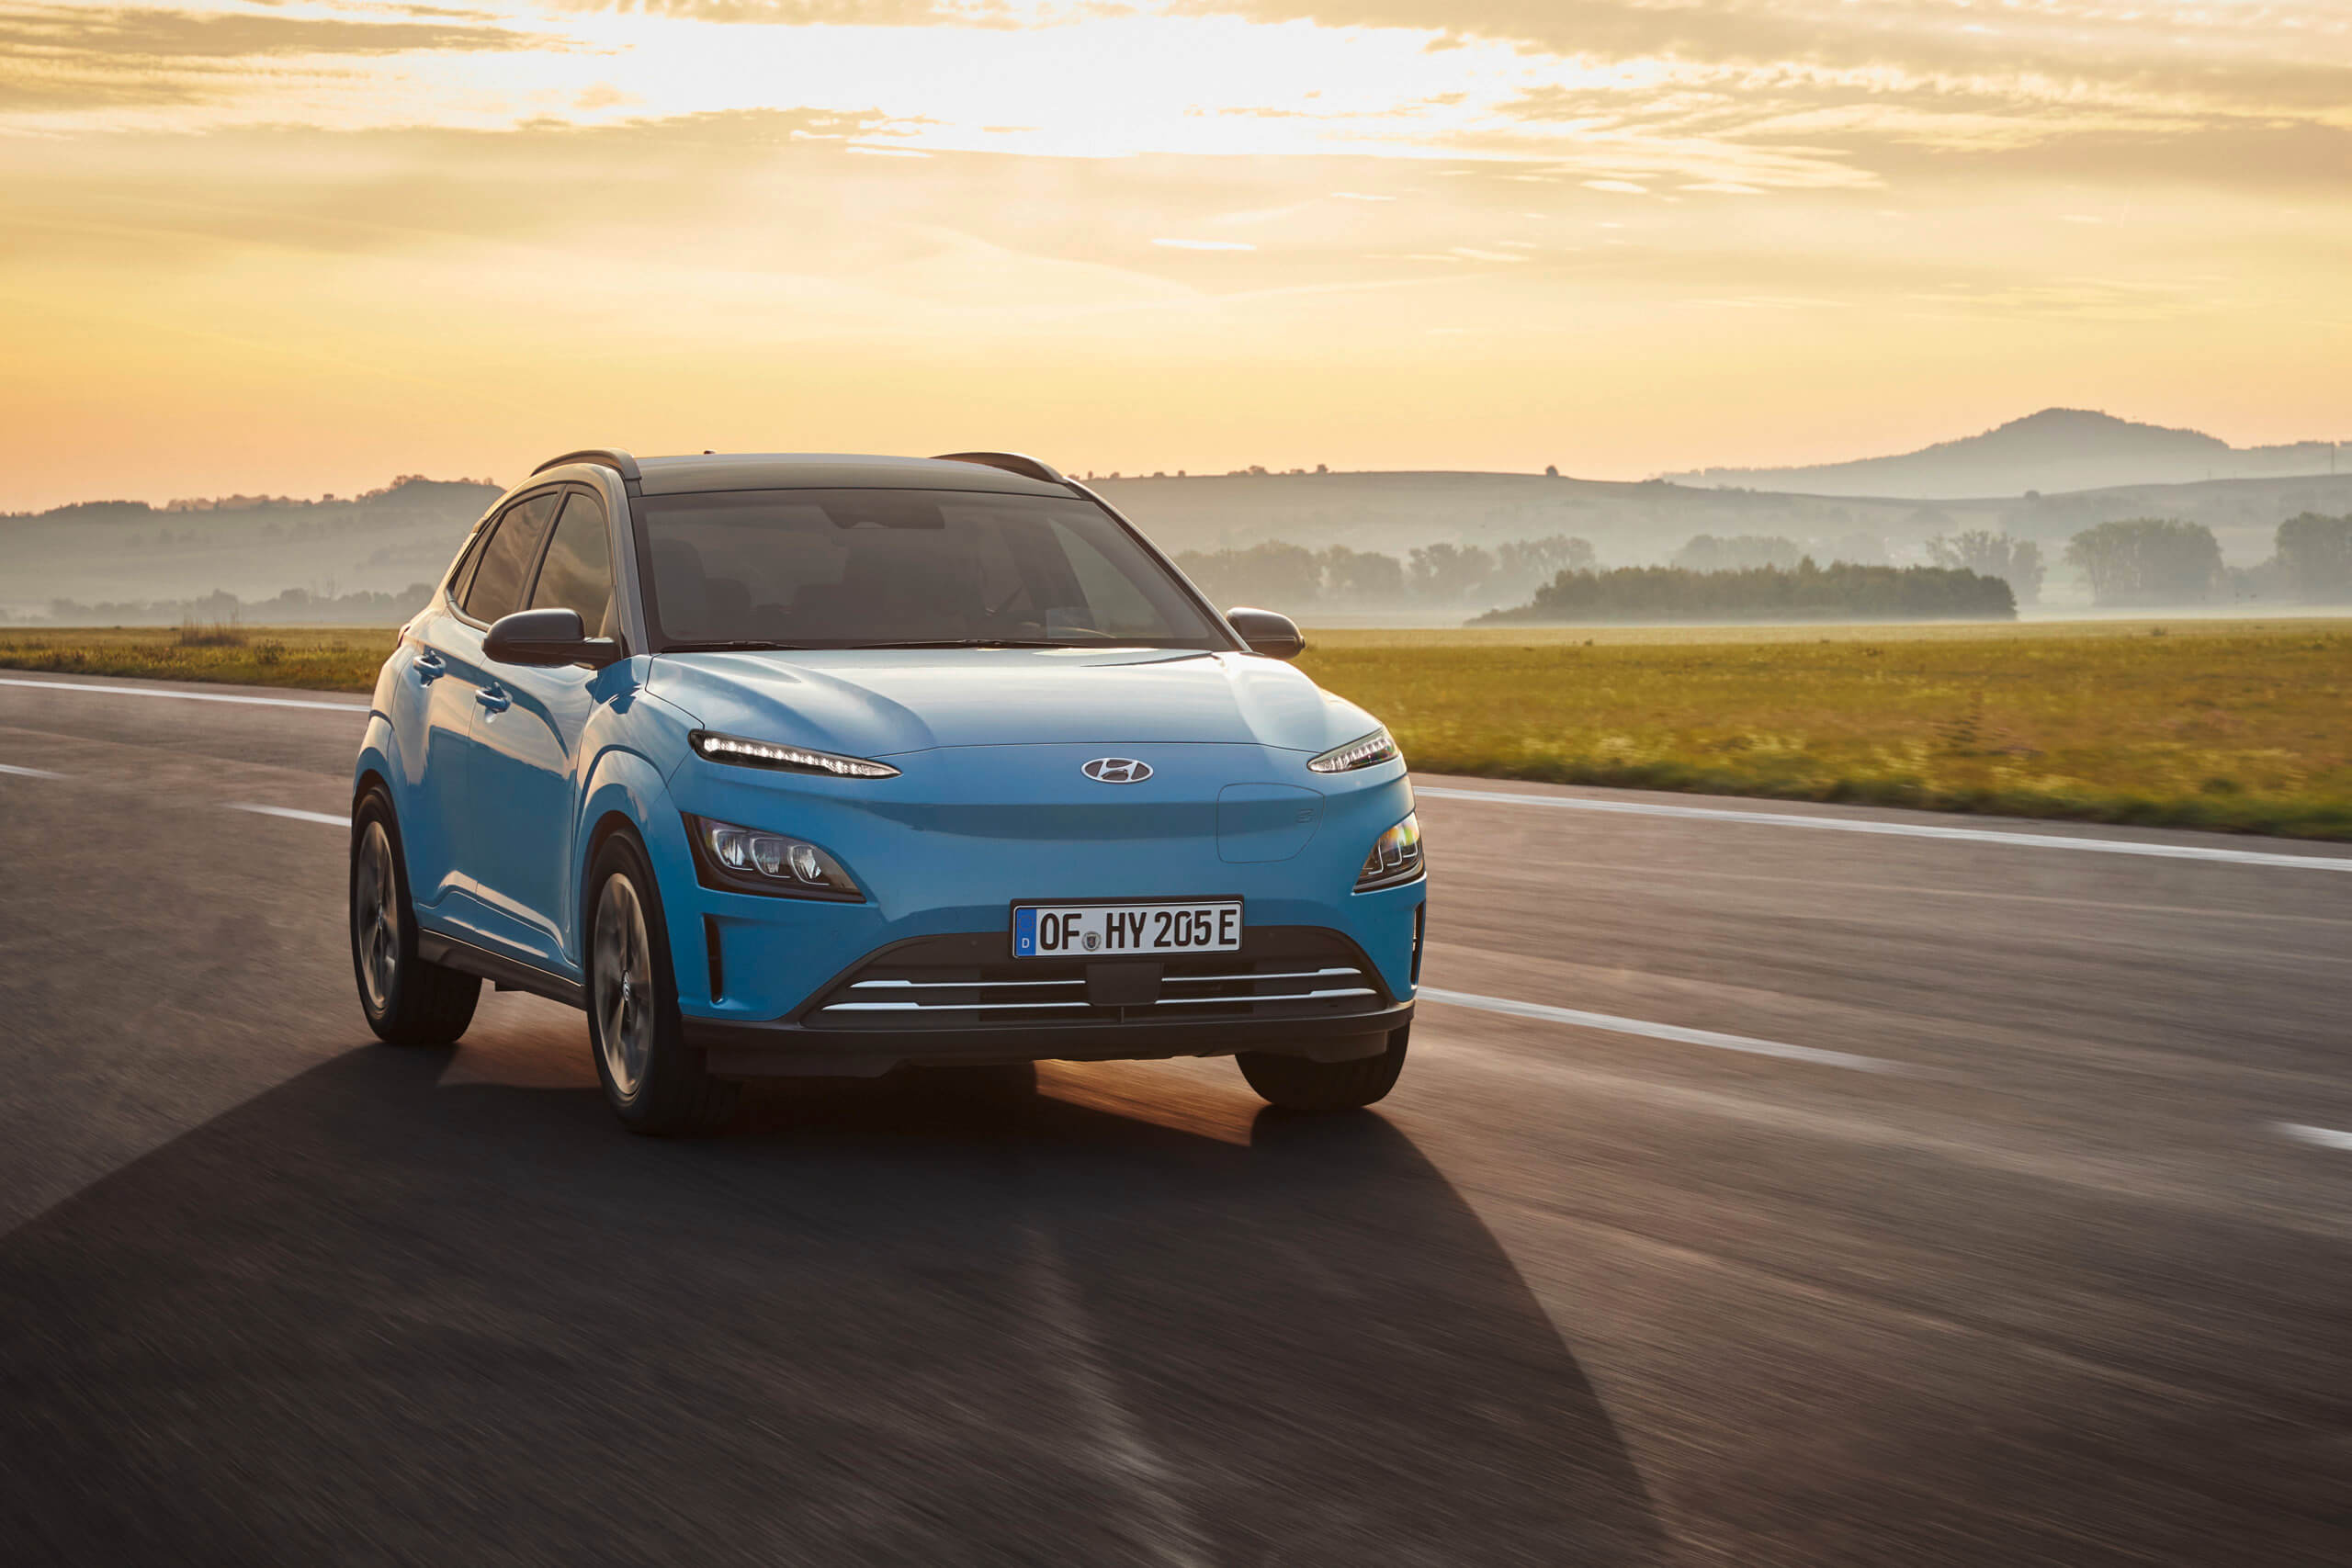 Hyundai Kona electric, Car subscription, Monthly pricing, Easy ownership, 2560x1710 HD Desktop